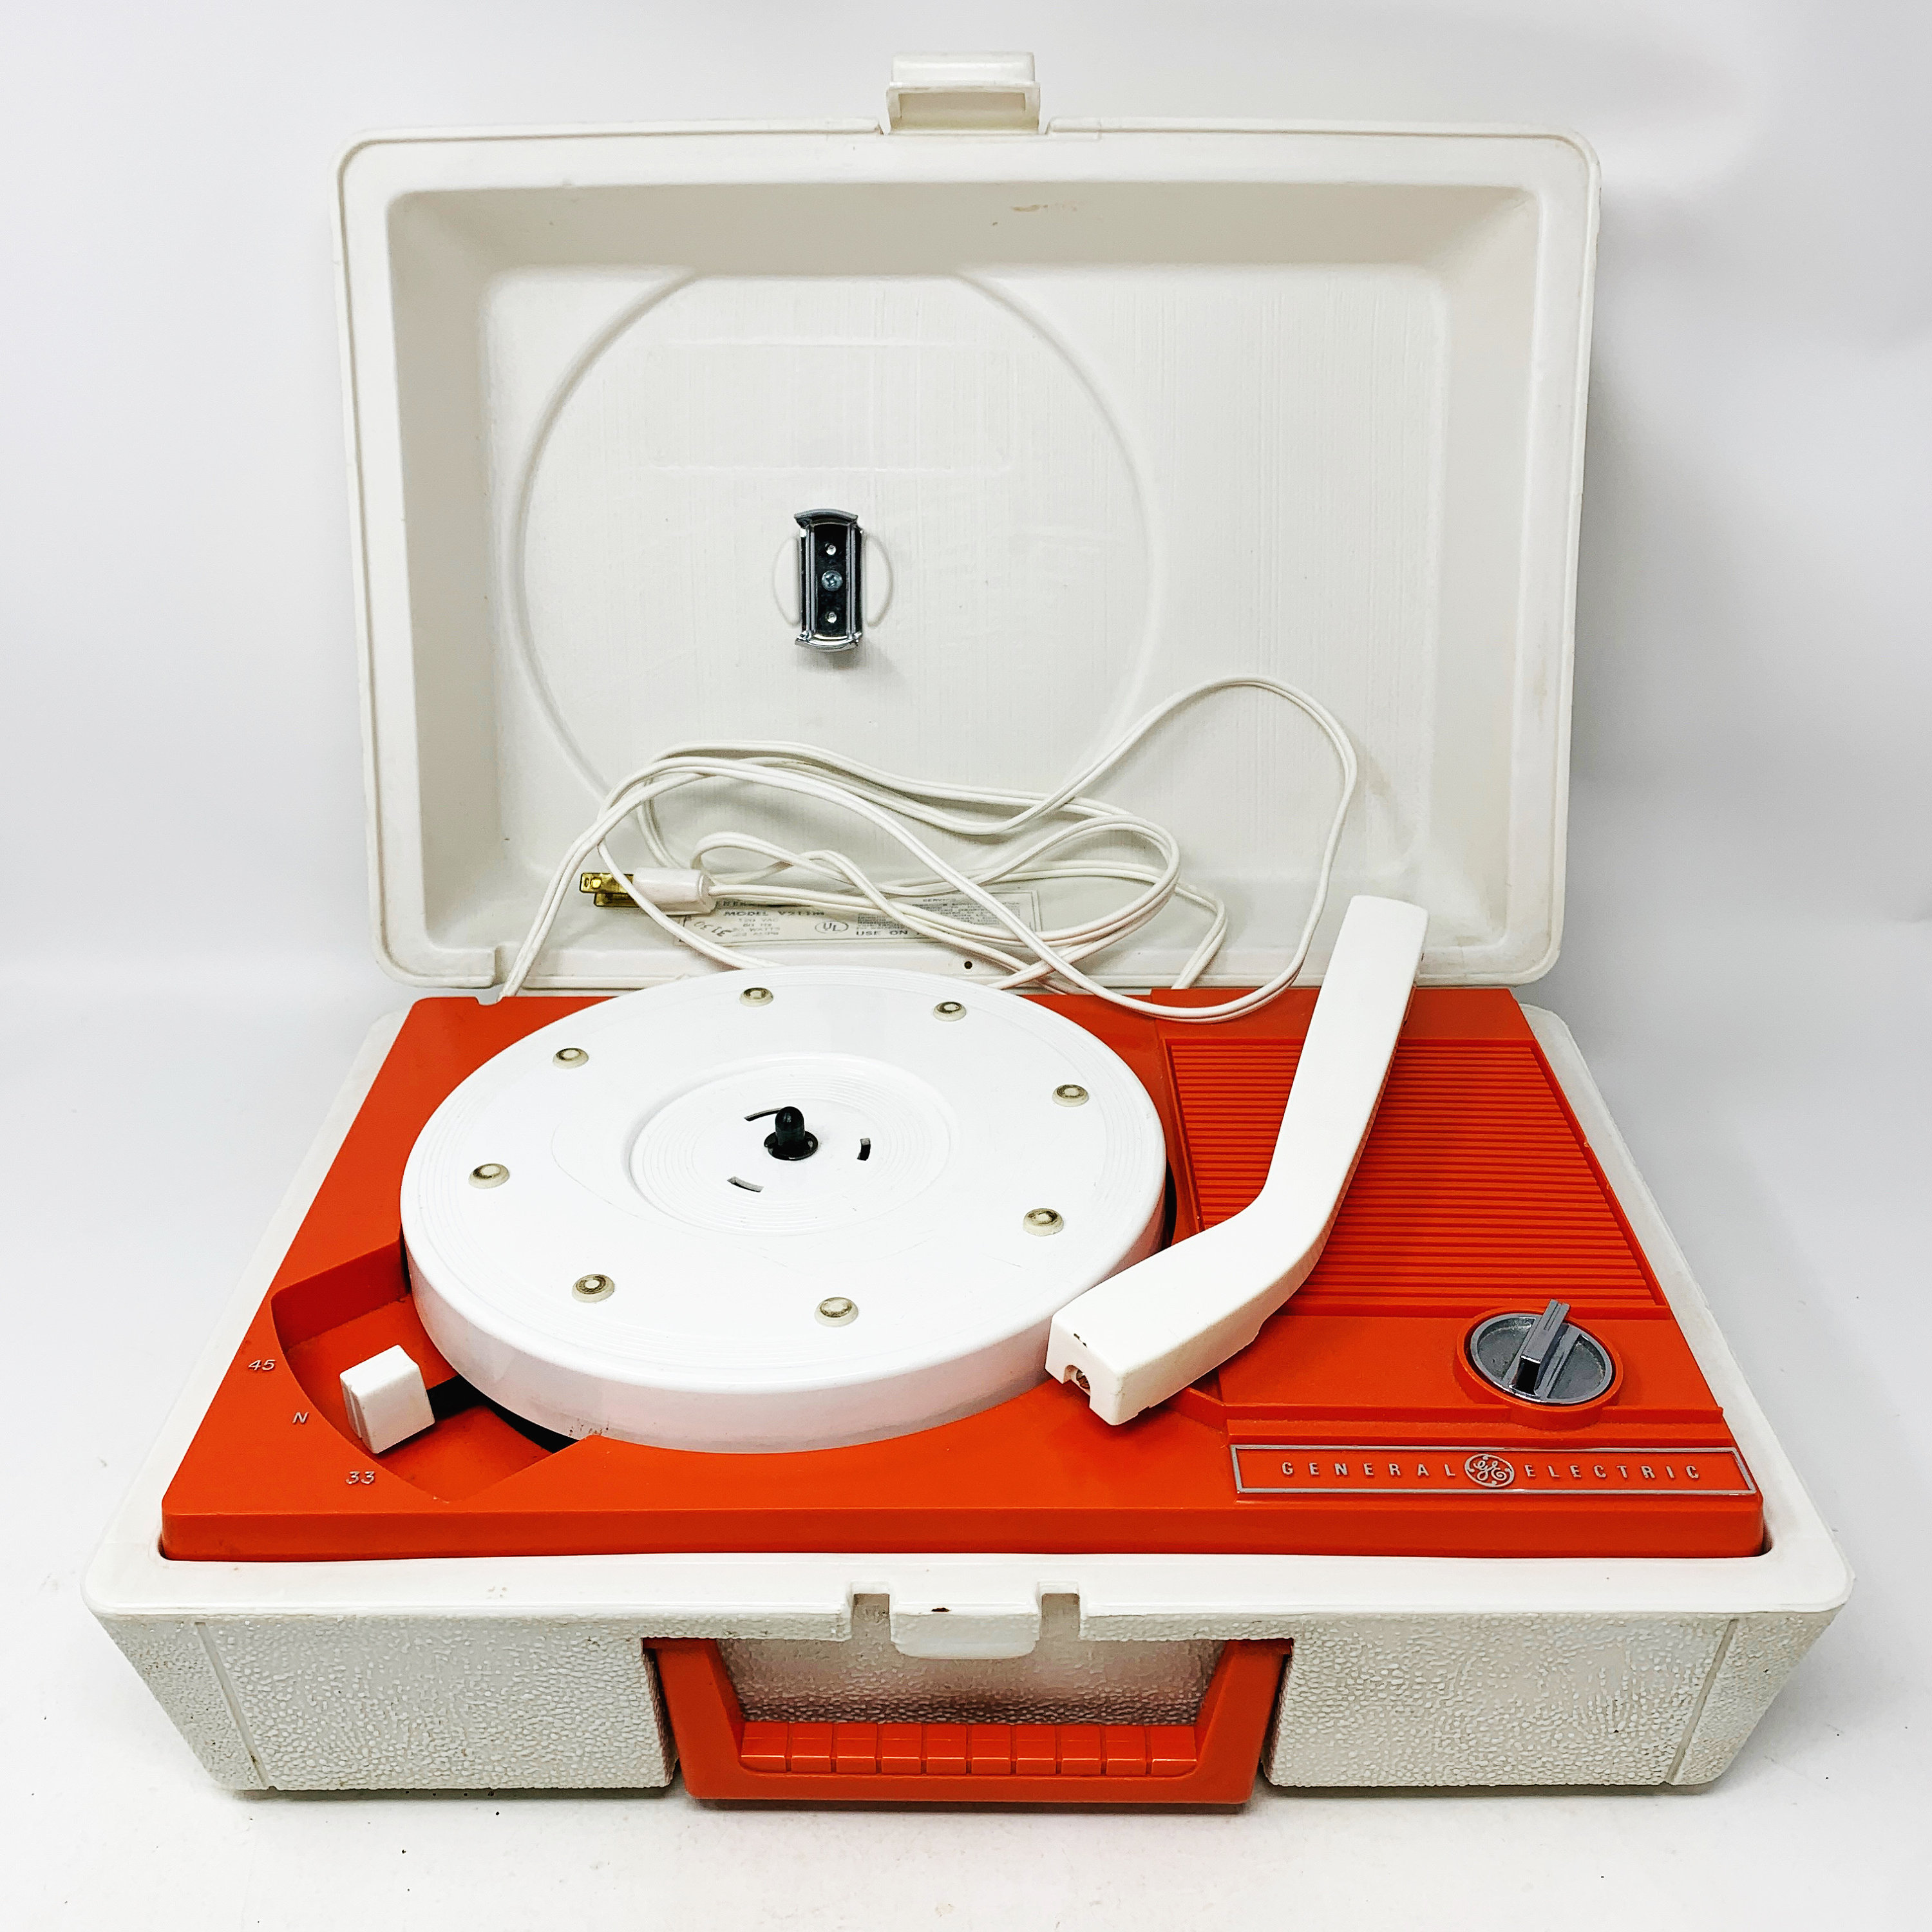 Portable Record Player - VIntage - General Electric GE Solid State - V211m  Orange and White - Turntable - WORKS